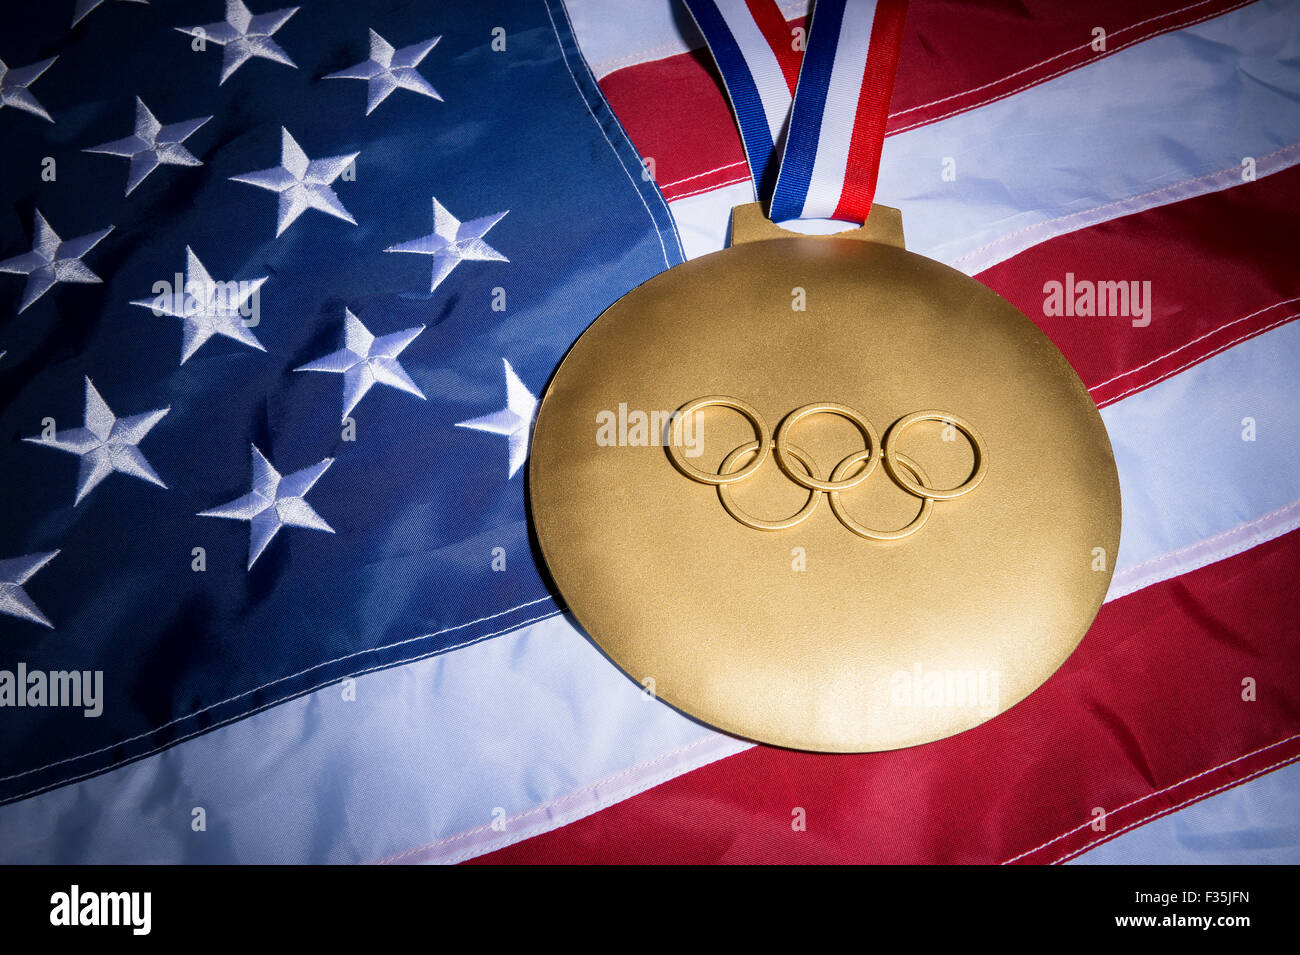 RIO DE JANEIRO, BRAZIL - FEBRUARY 3, 2015: Large gold medal featuring Olympic rings sits on American flag background. Stock Photo